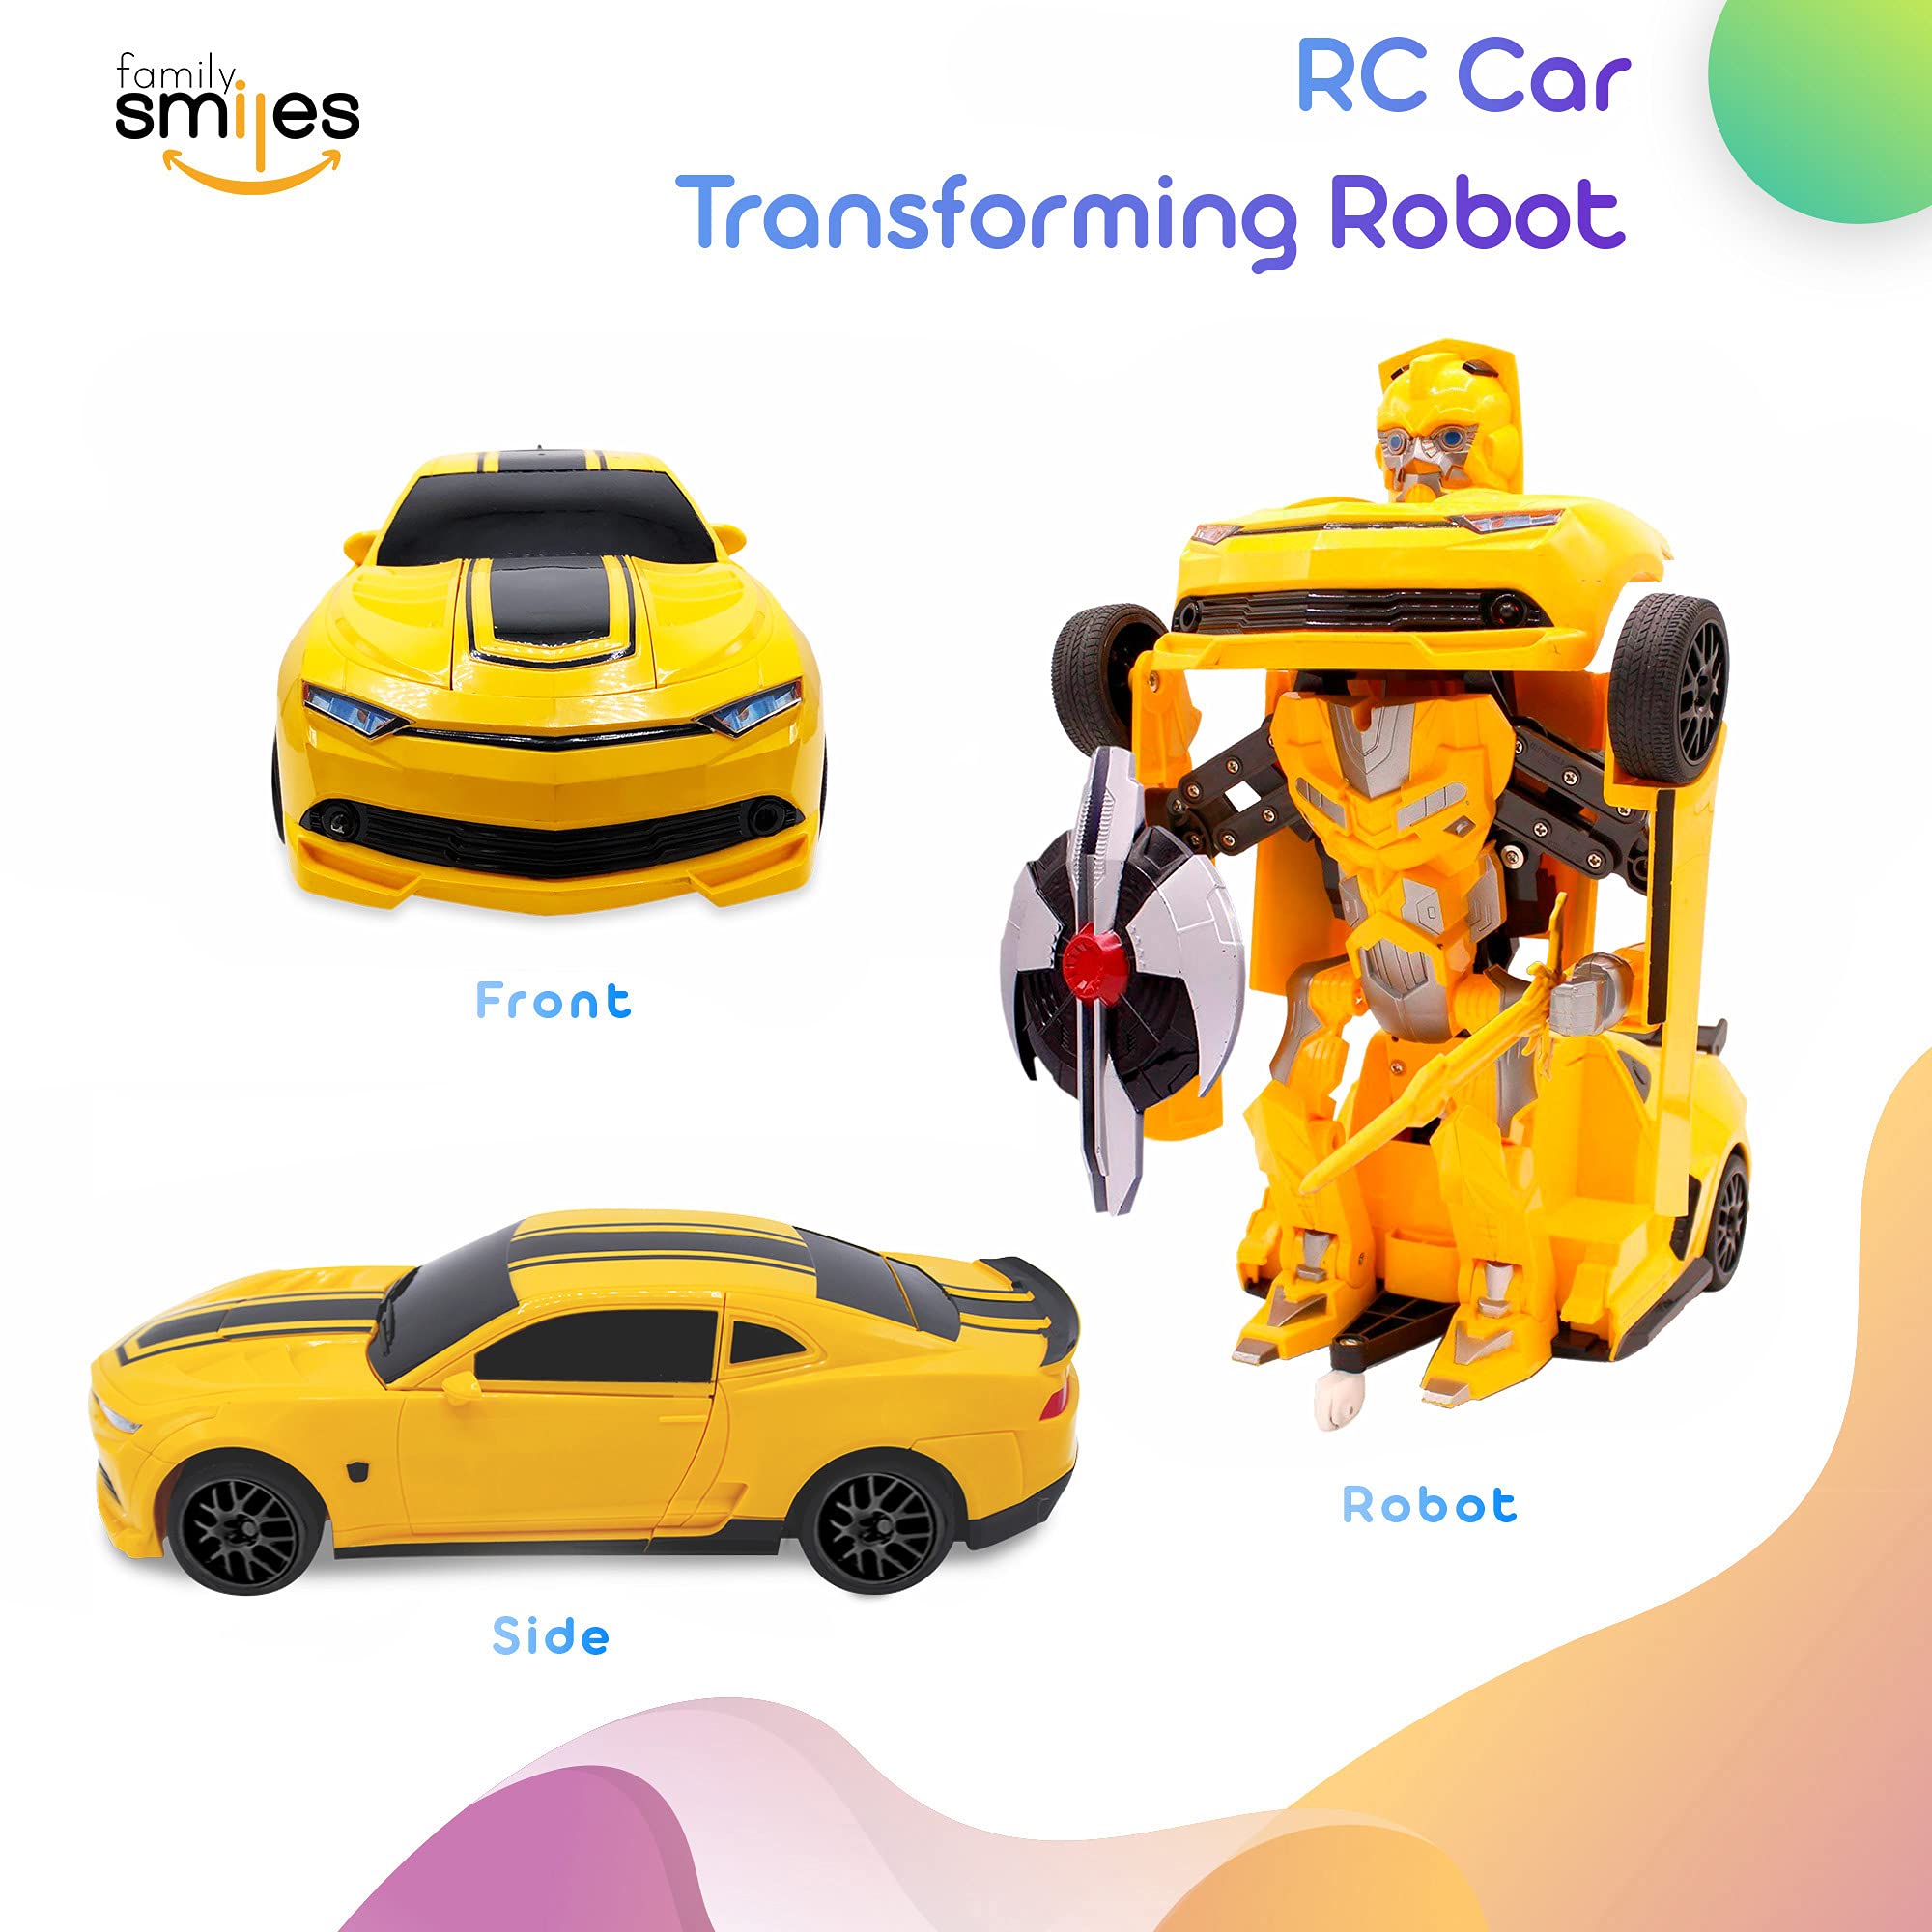 Kids RC Toy Sports Car Transforming Robot Remote Control with One Button Transformation, Realistic Engine Sounds, 360 Speed Drifting, Sword and Shield Included Toys For Boys 1:14 Scale Yellow